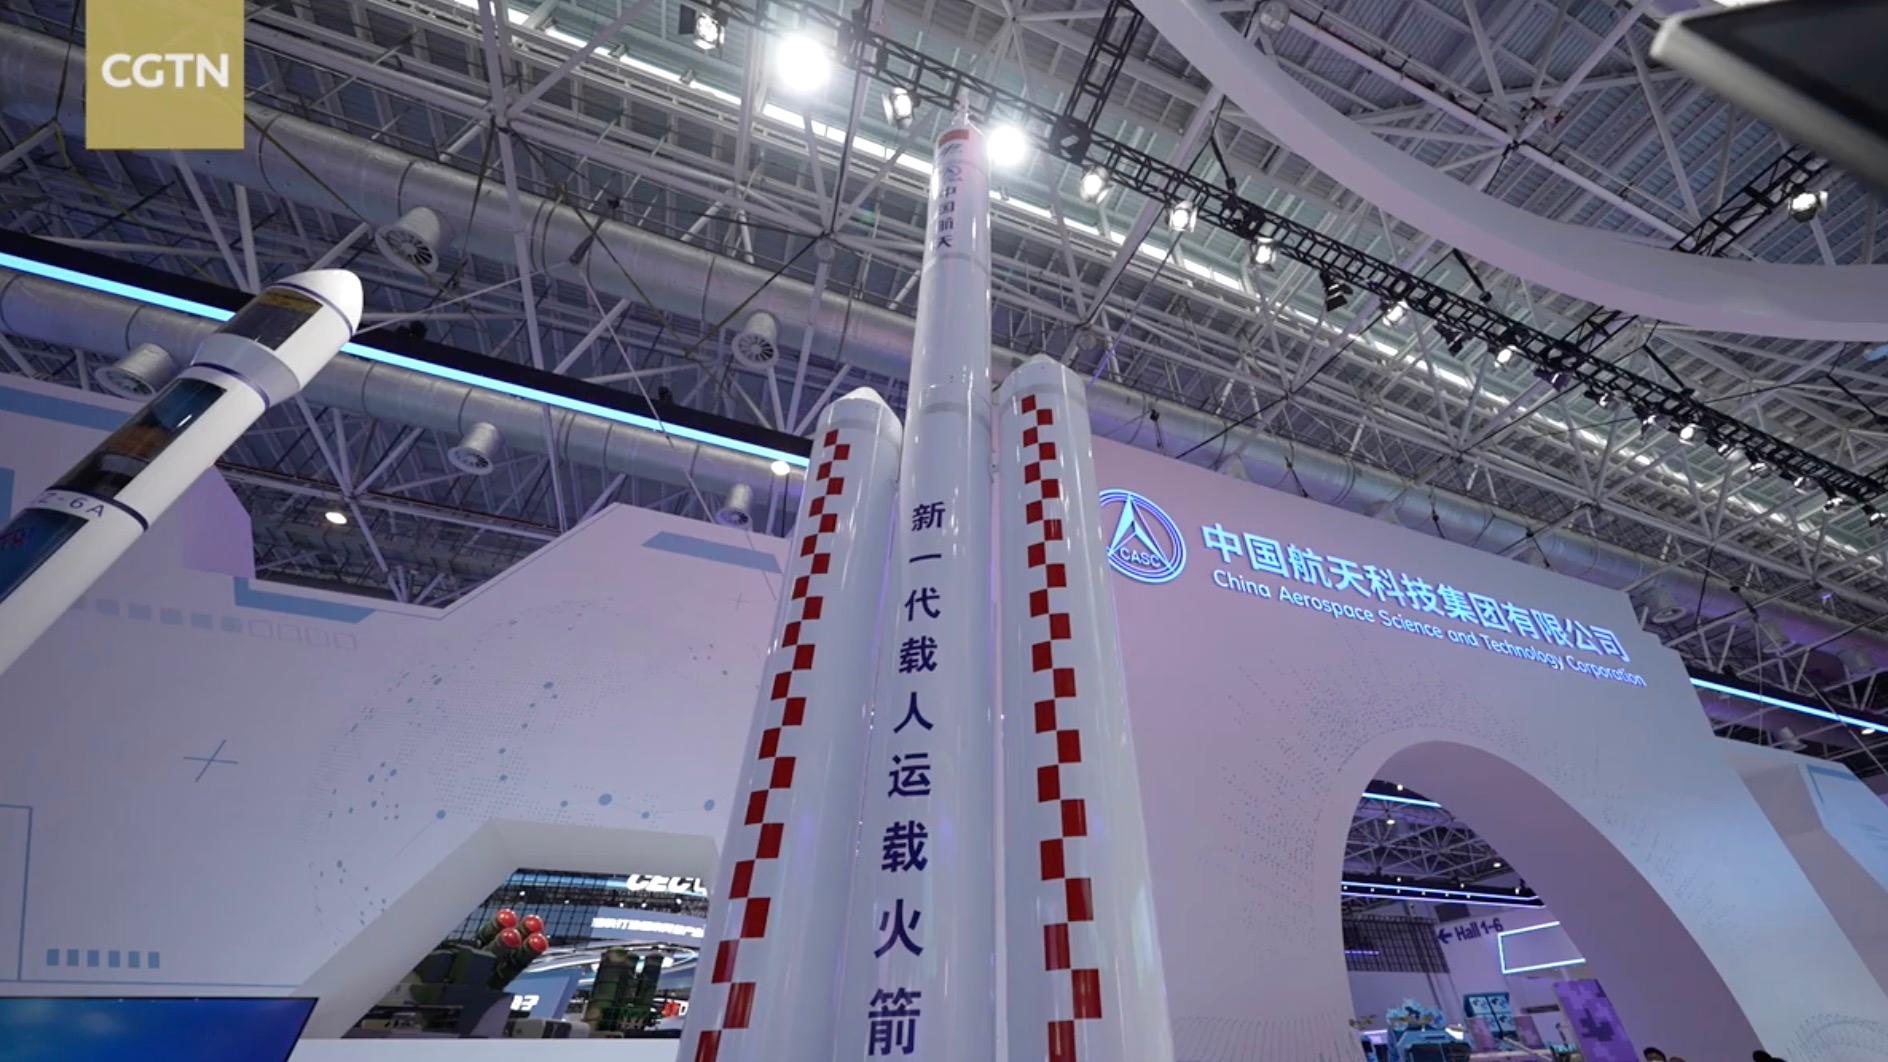 The model of the country's next-generation manned rocket for a moon landing is on display at the ongoing Airshow China 2022 in Zhuhai City of south China's Guangdong Province, November 10, 2022. /CGTN